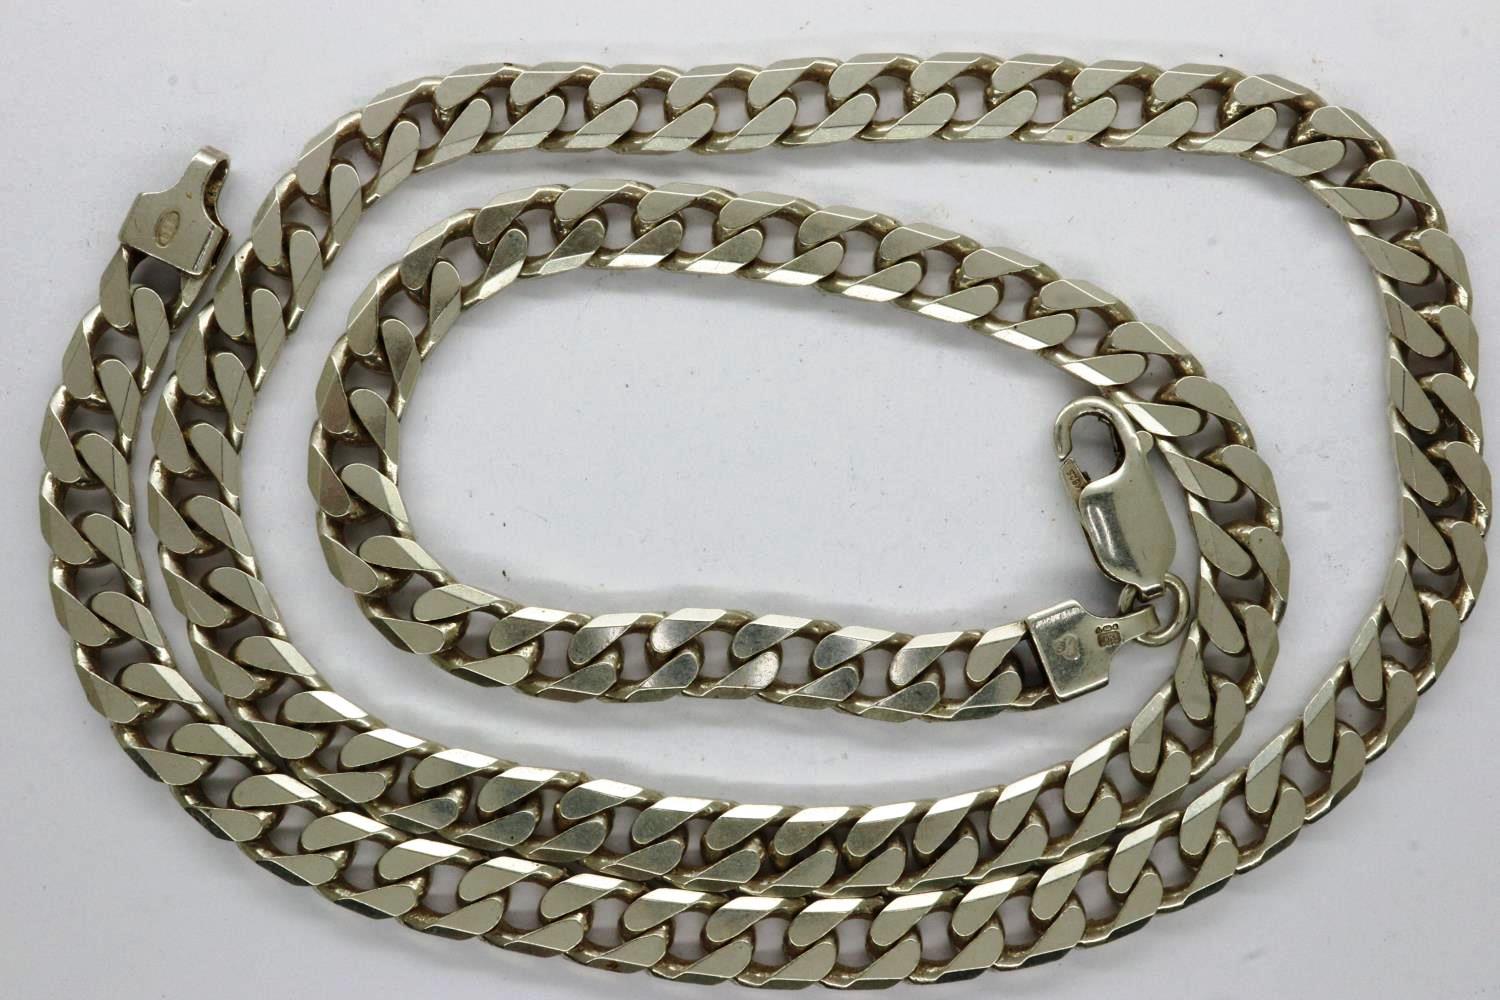 925 silver heavy gauge flat link neck chain, L: 50 cm, 33g. UK P&P Group 0 (£6+VAT for the first lot